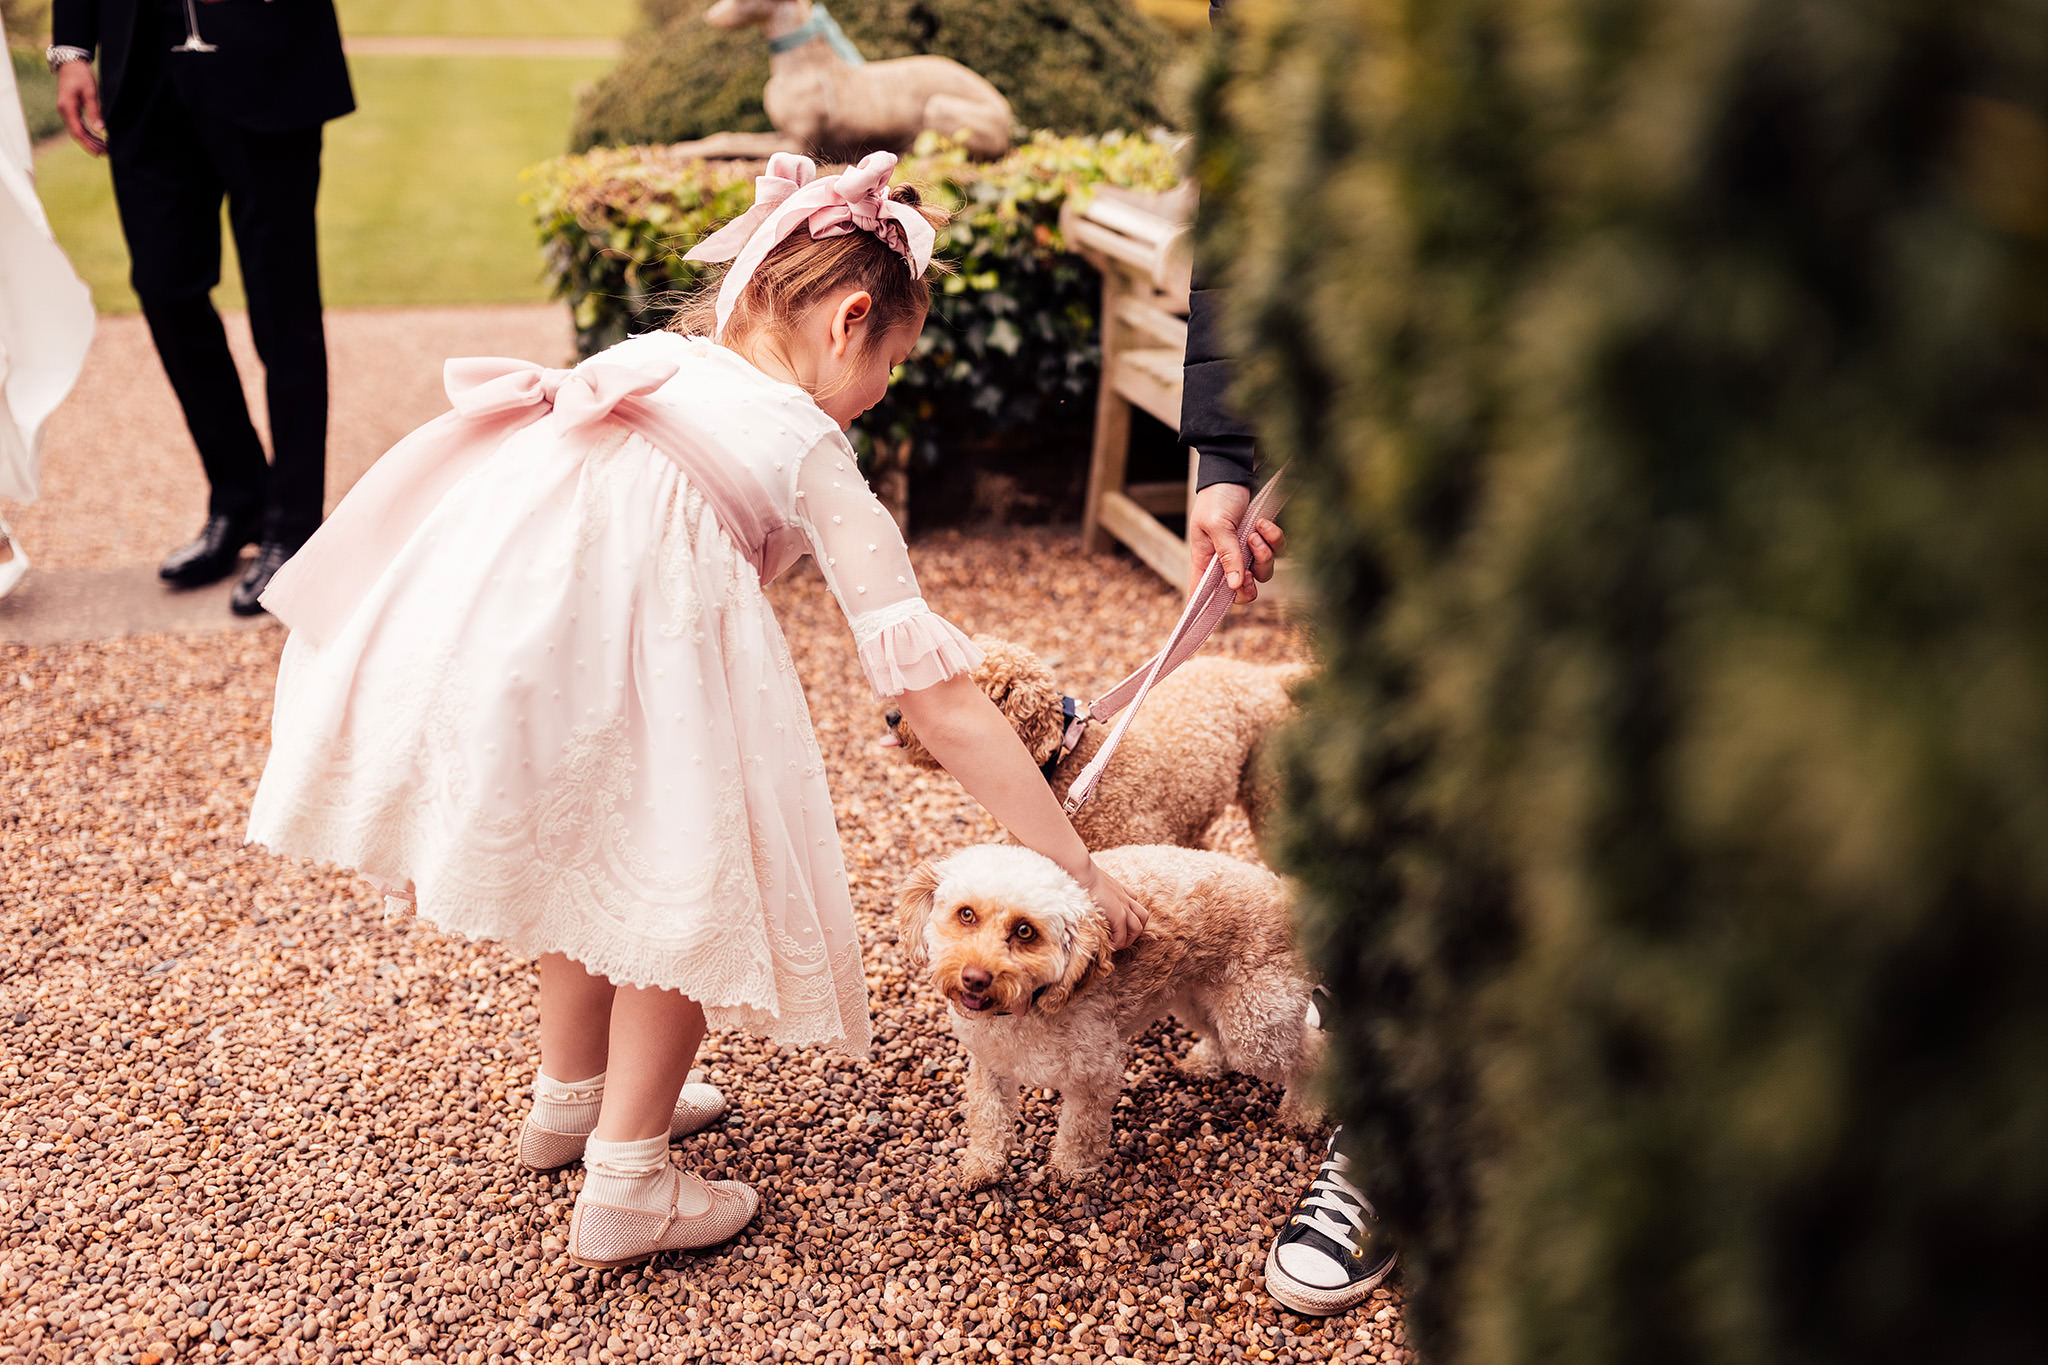 A little girl wearing a traditional pink bridesmaid dress pets two terrier dogs